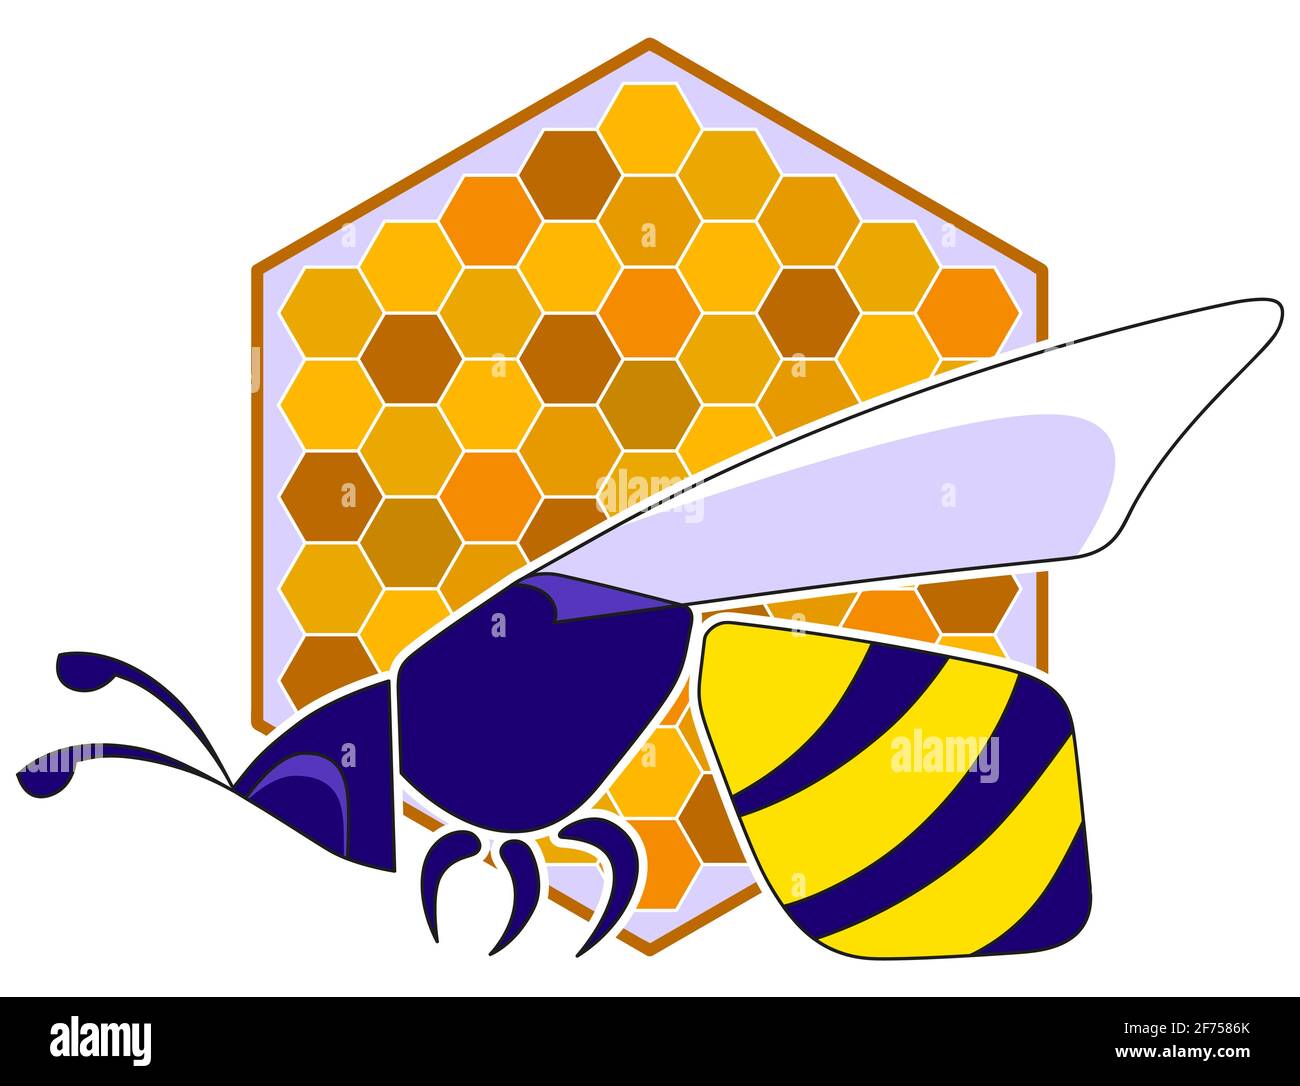 Stylized bee on a honeycomb background. Amber colors. Stock Vector